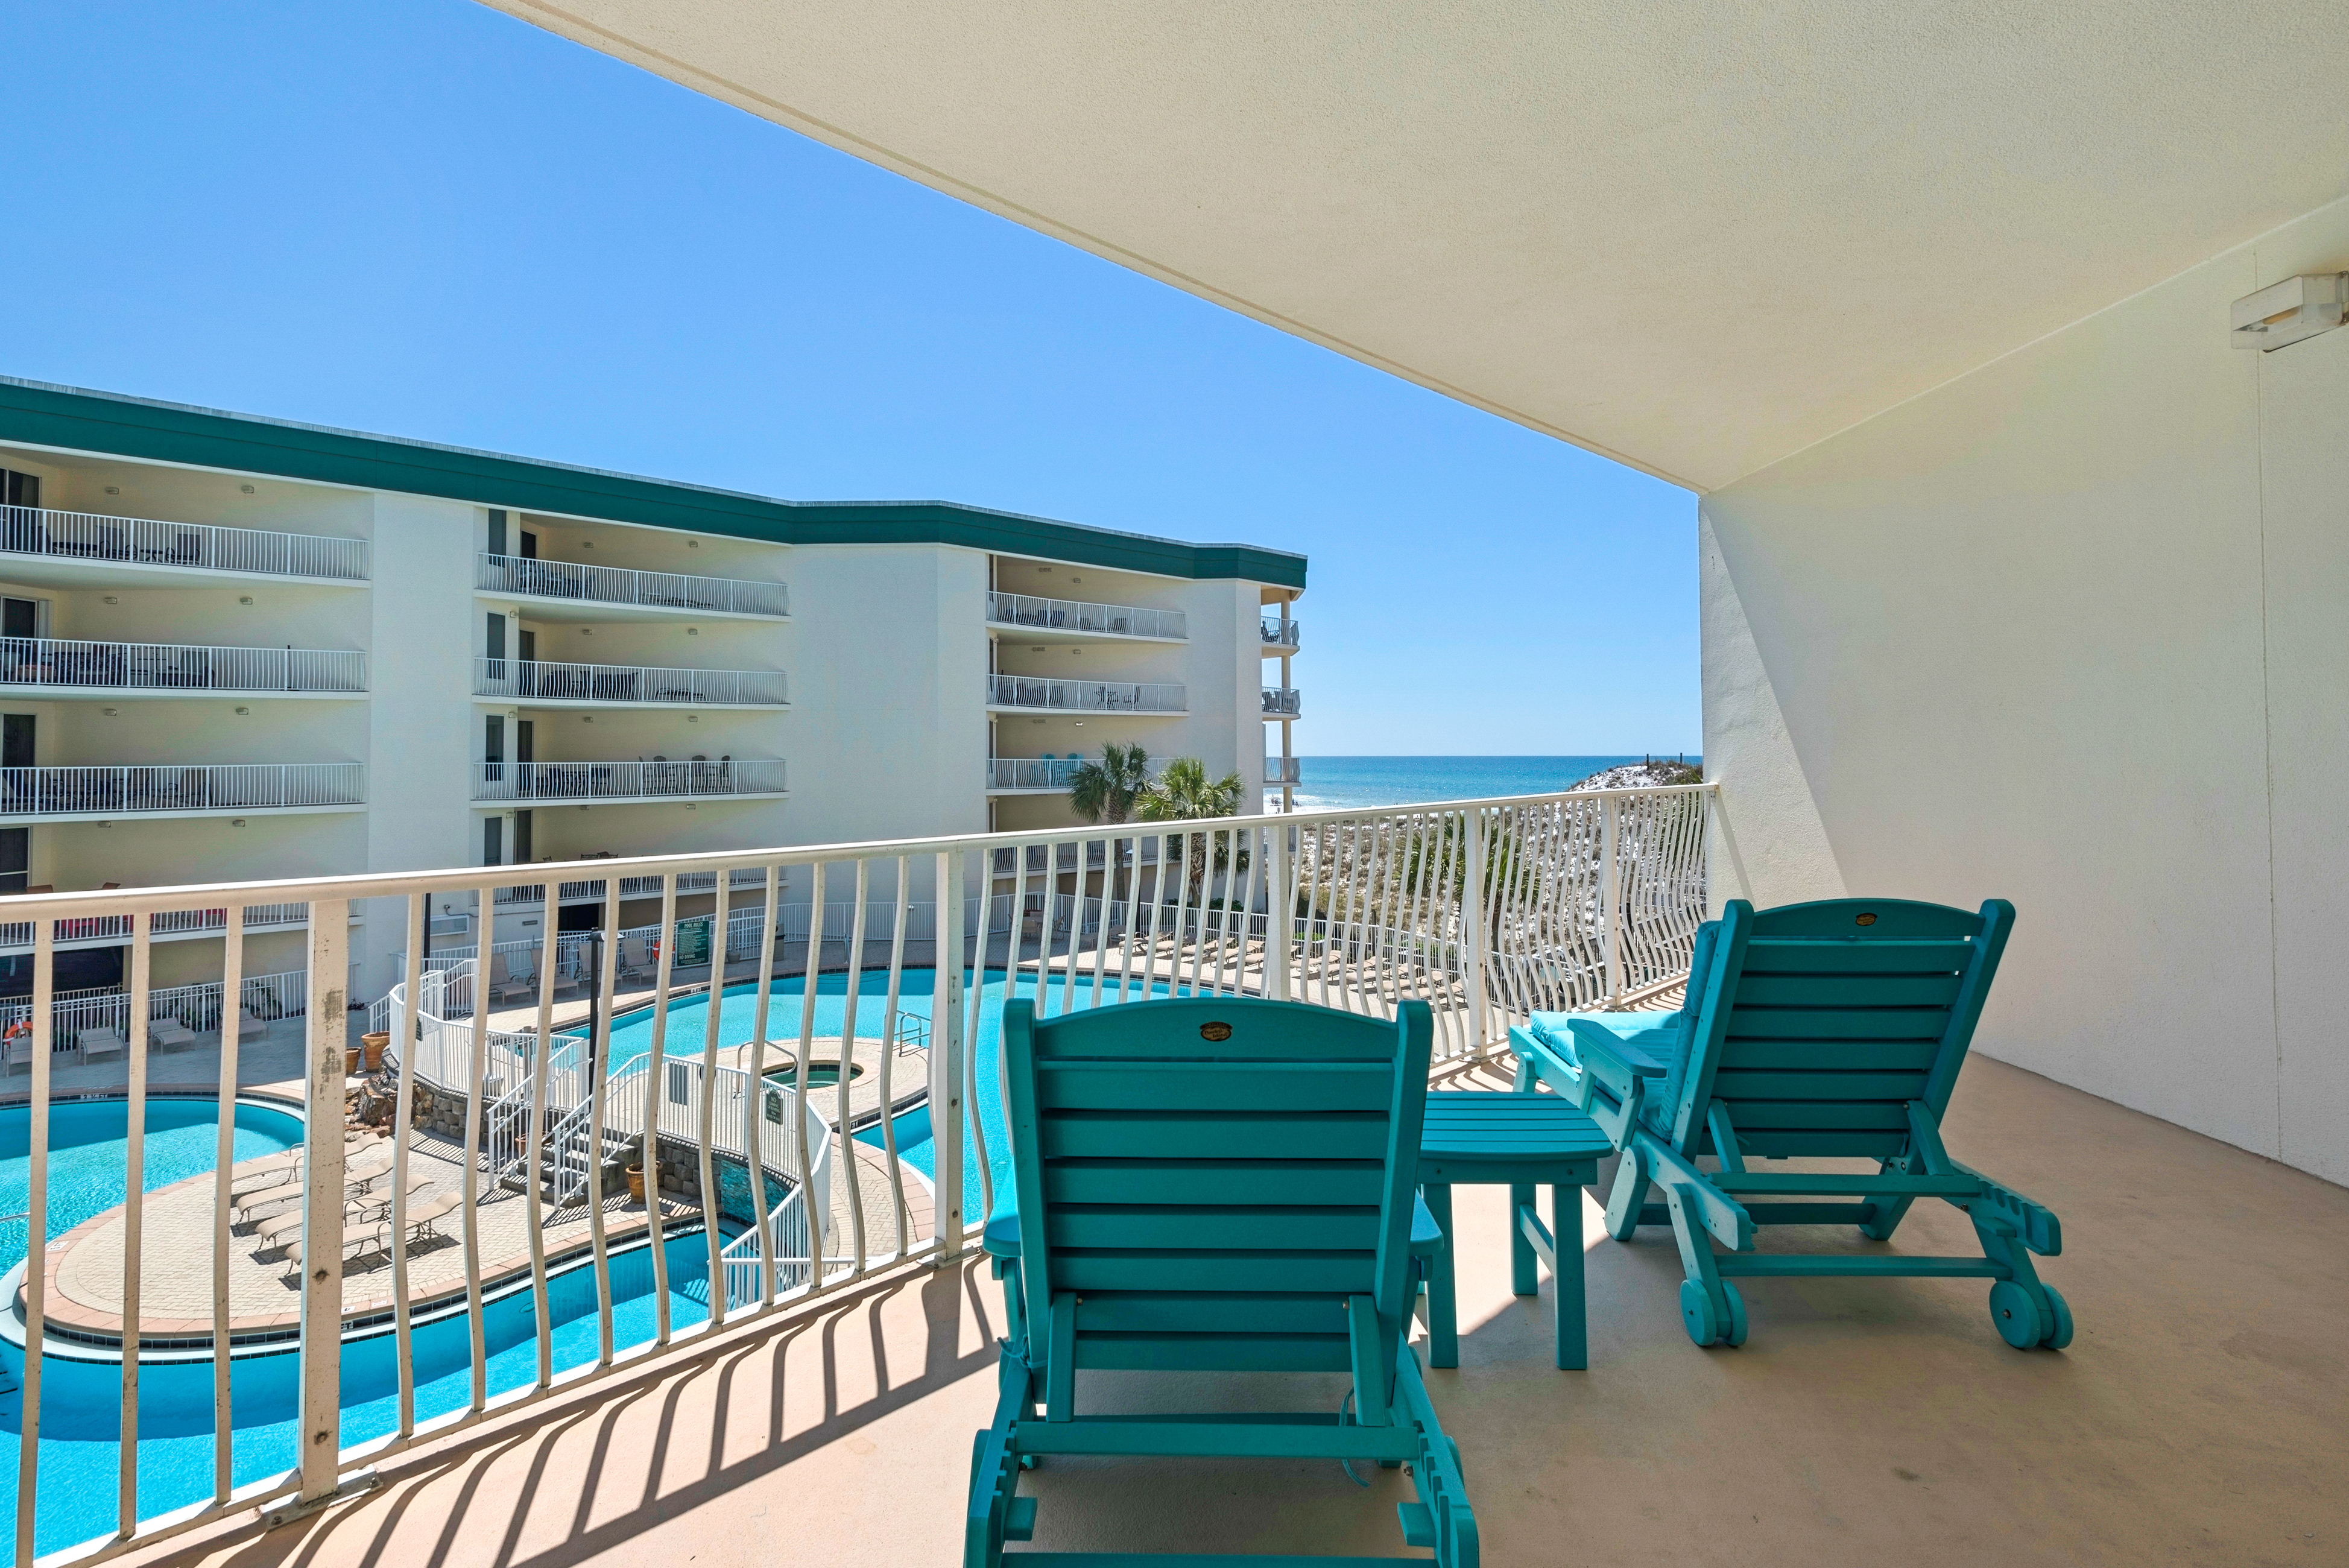 Dunes of Seagrove B202 Condo rental in Dunes of Seagrove in Highway 30-A Florida - #4